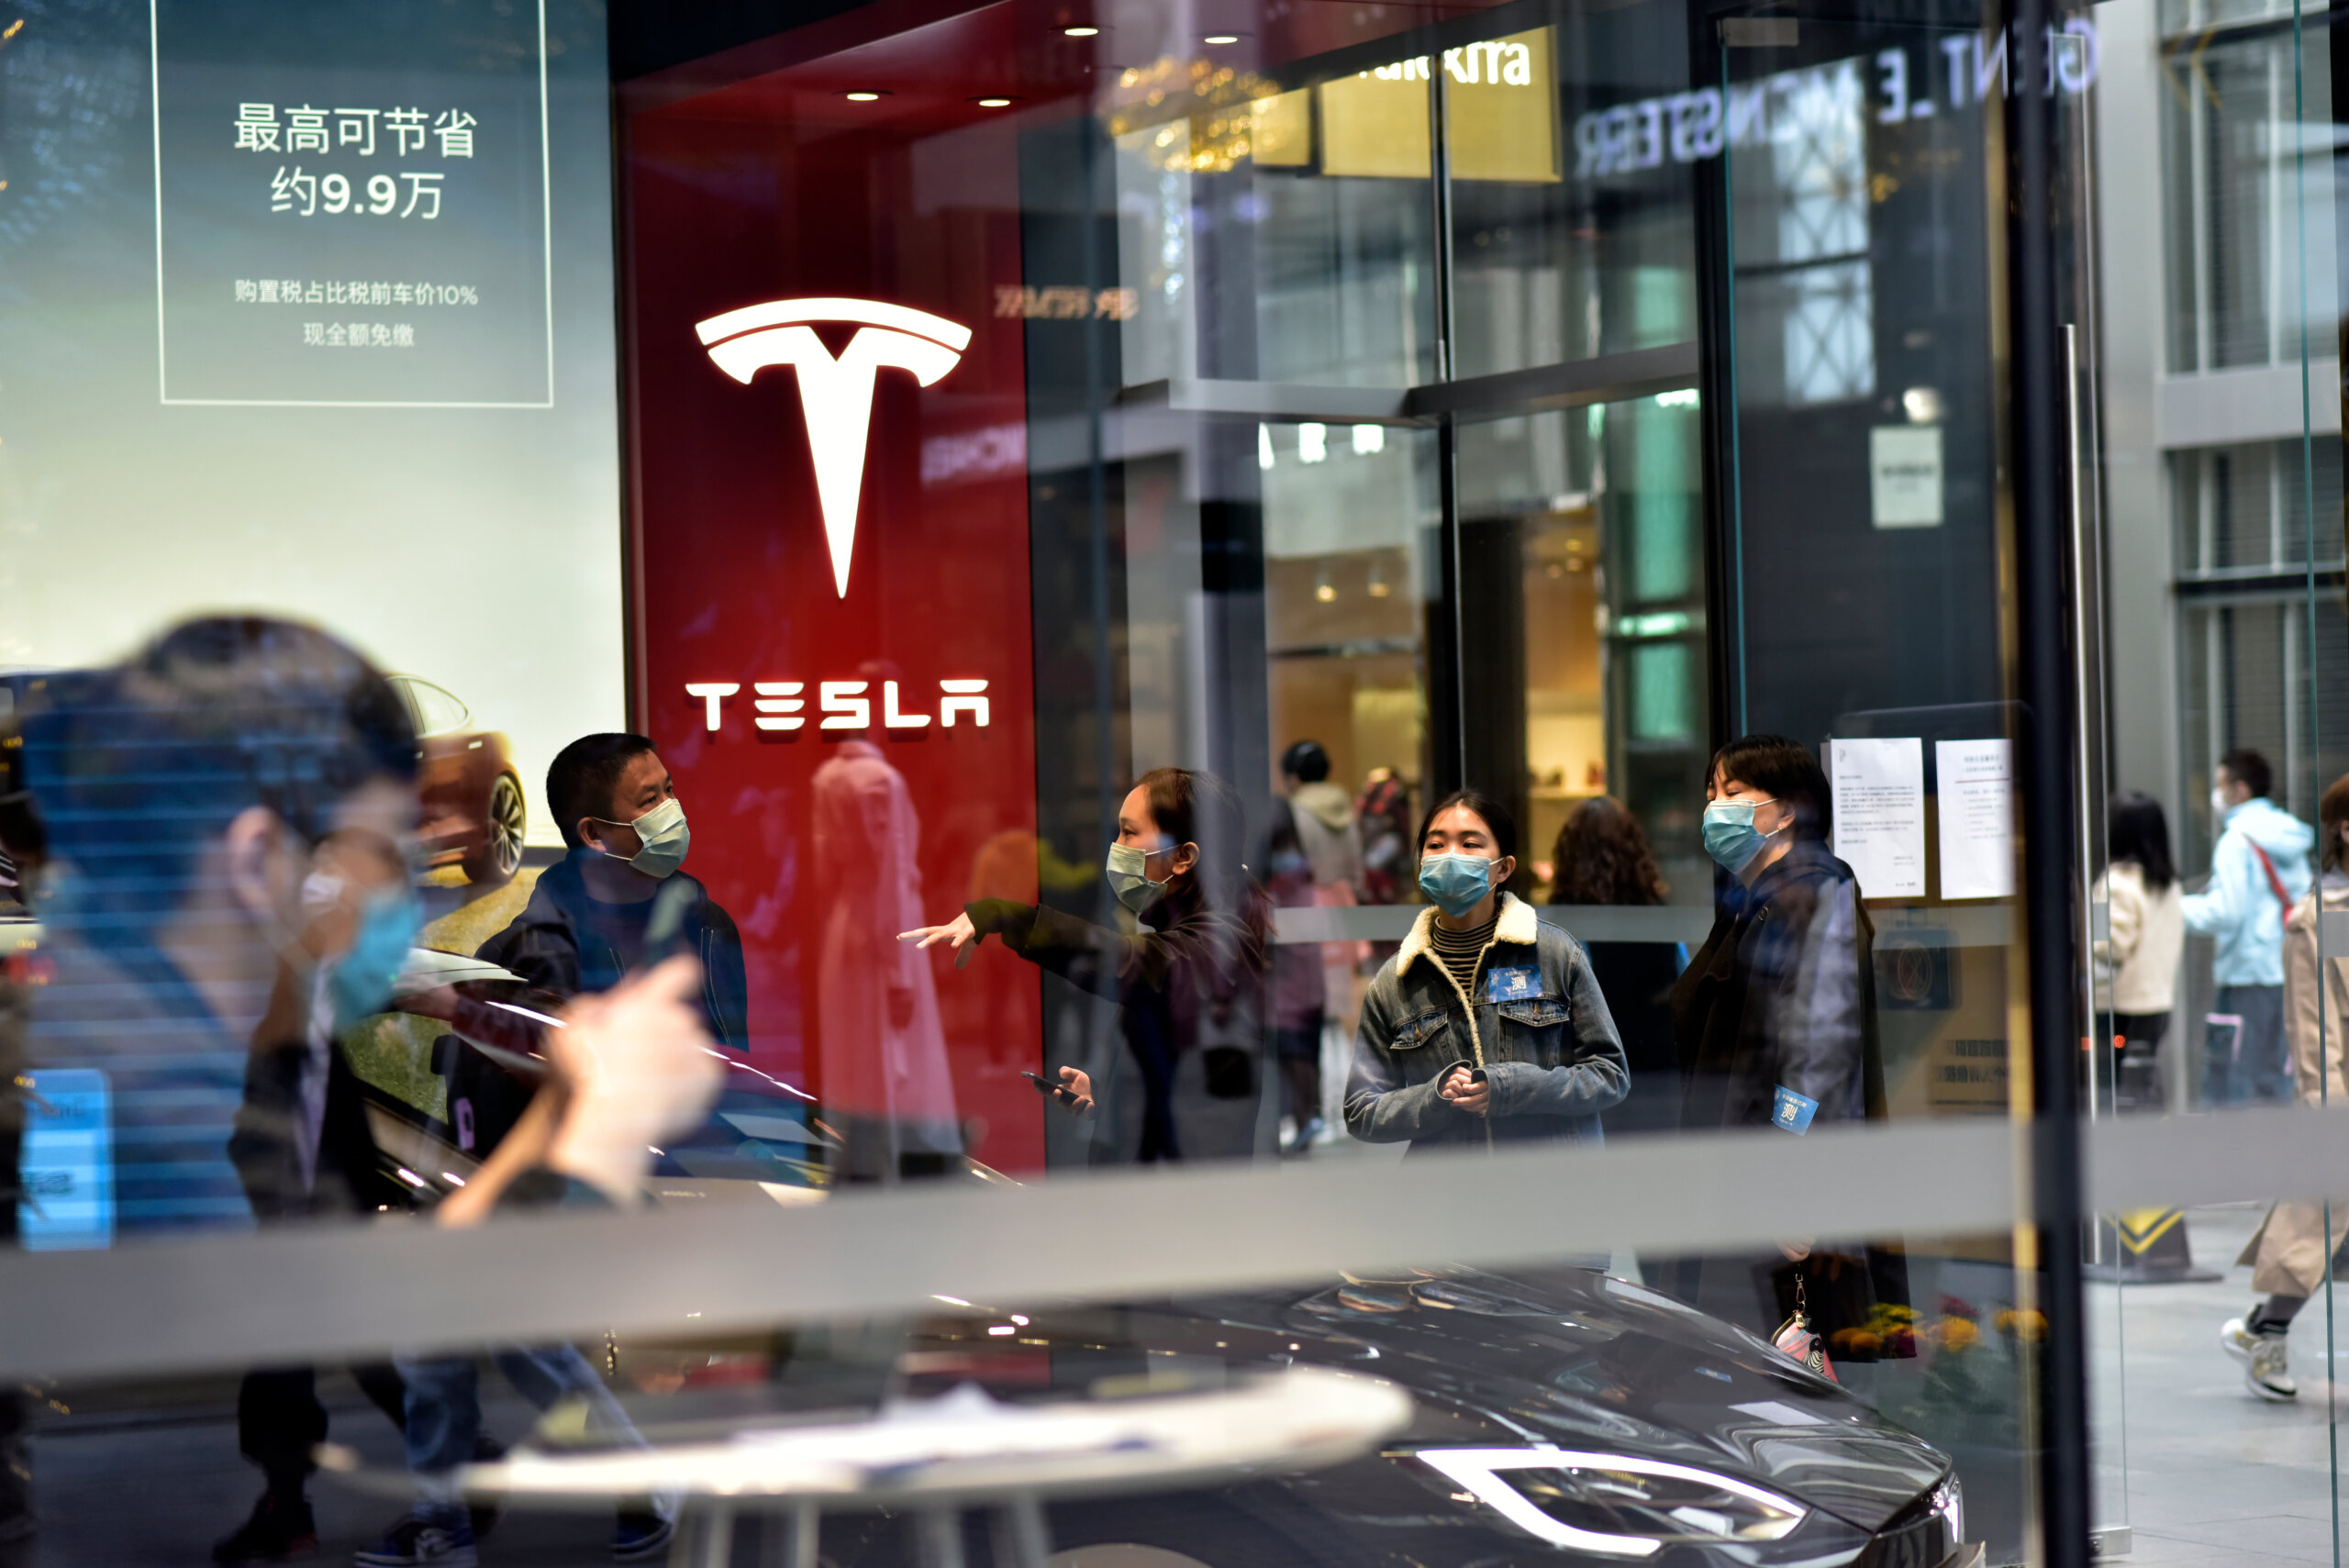 US-China tensions didn't stop Tesla from plotting its manufacturing expansion in Shanghai